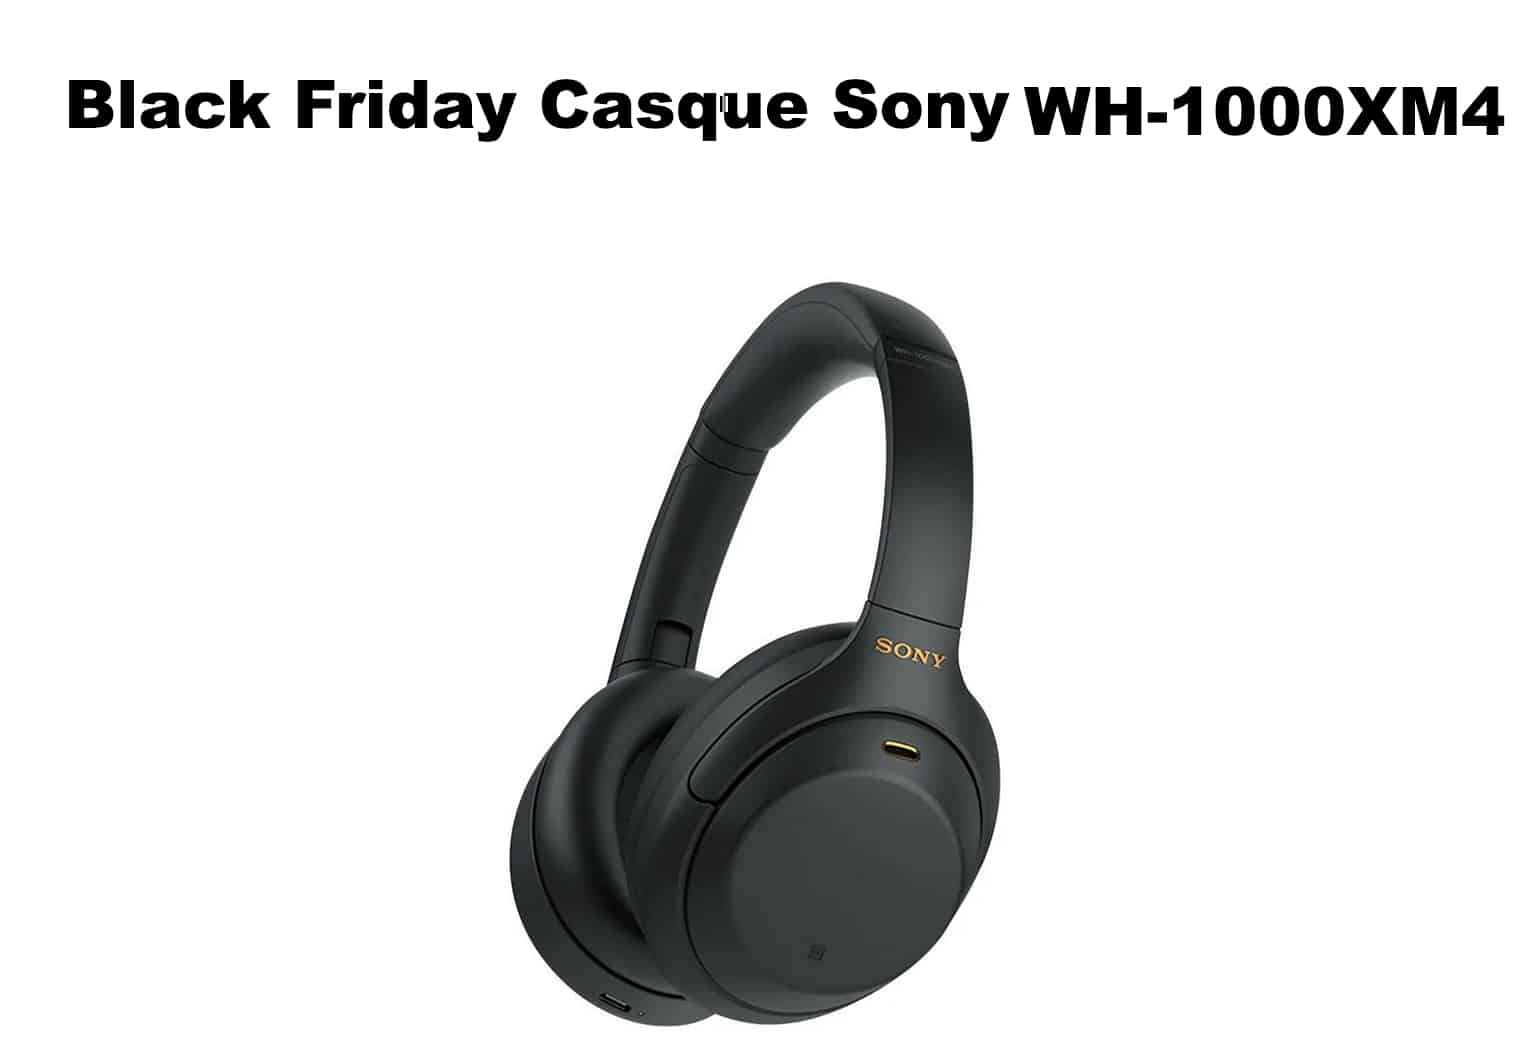 Black Friday Casque Sony WH-1000XM4